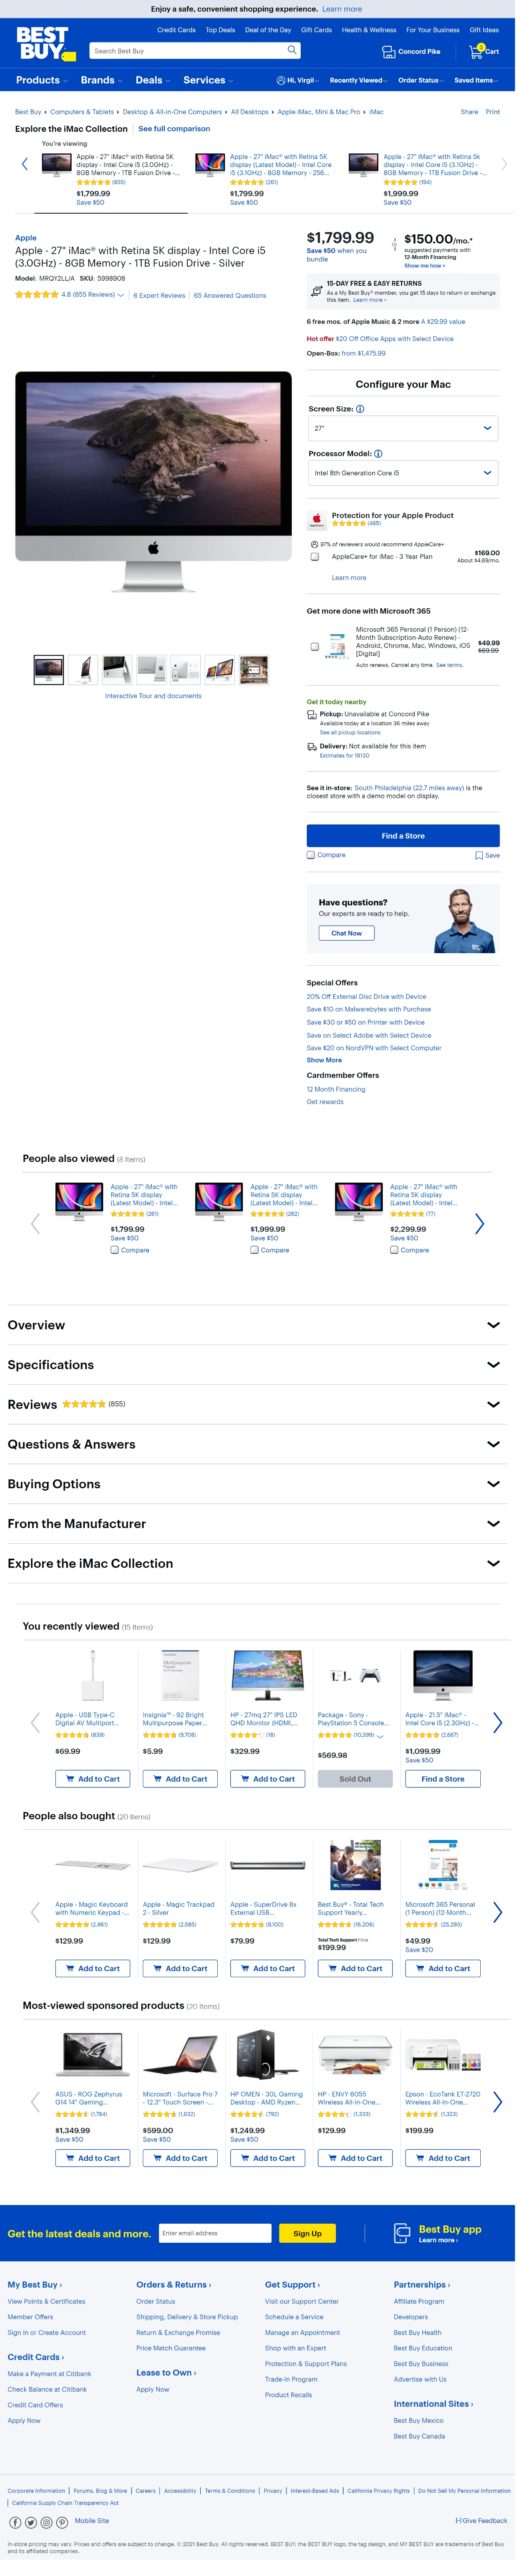 bestbuy product page desktop scaled